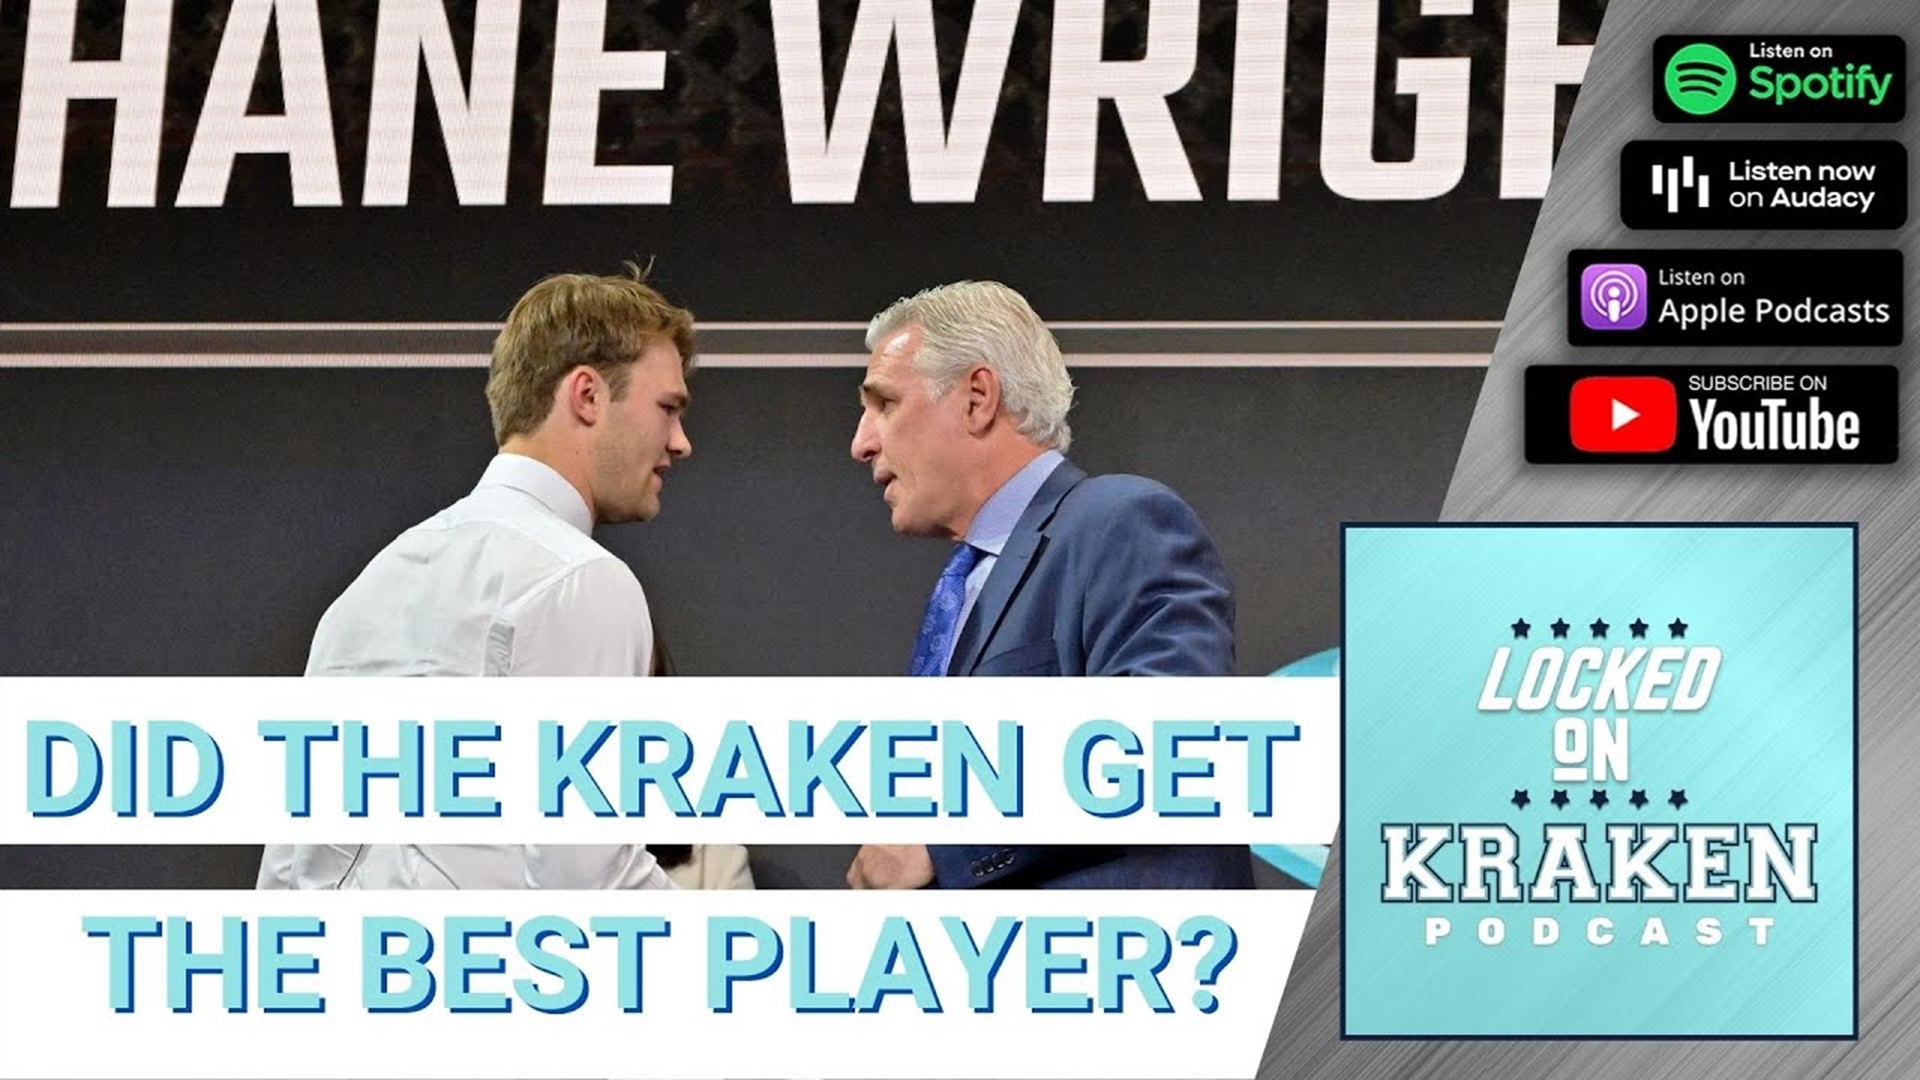 The Seattle Kraken took Shane Wright with the fourth overall pick in the 2022 NHL Entry Draft. Some are asking if he might have been the best player in the draft.